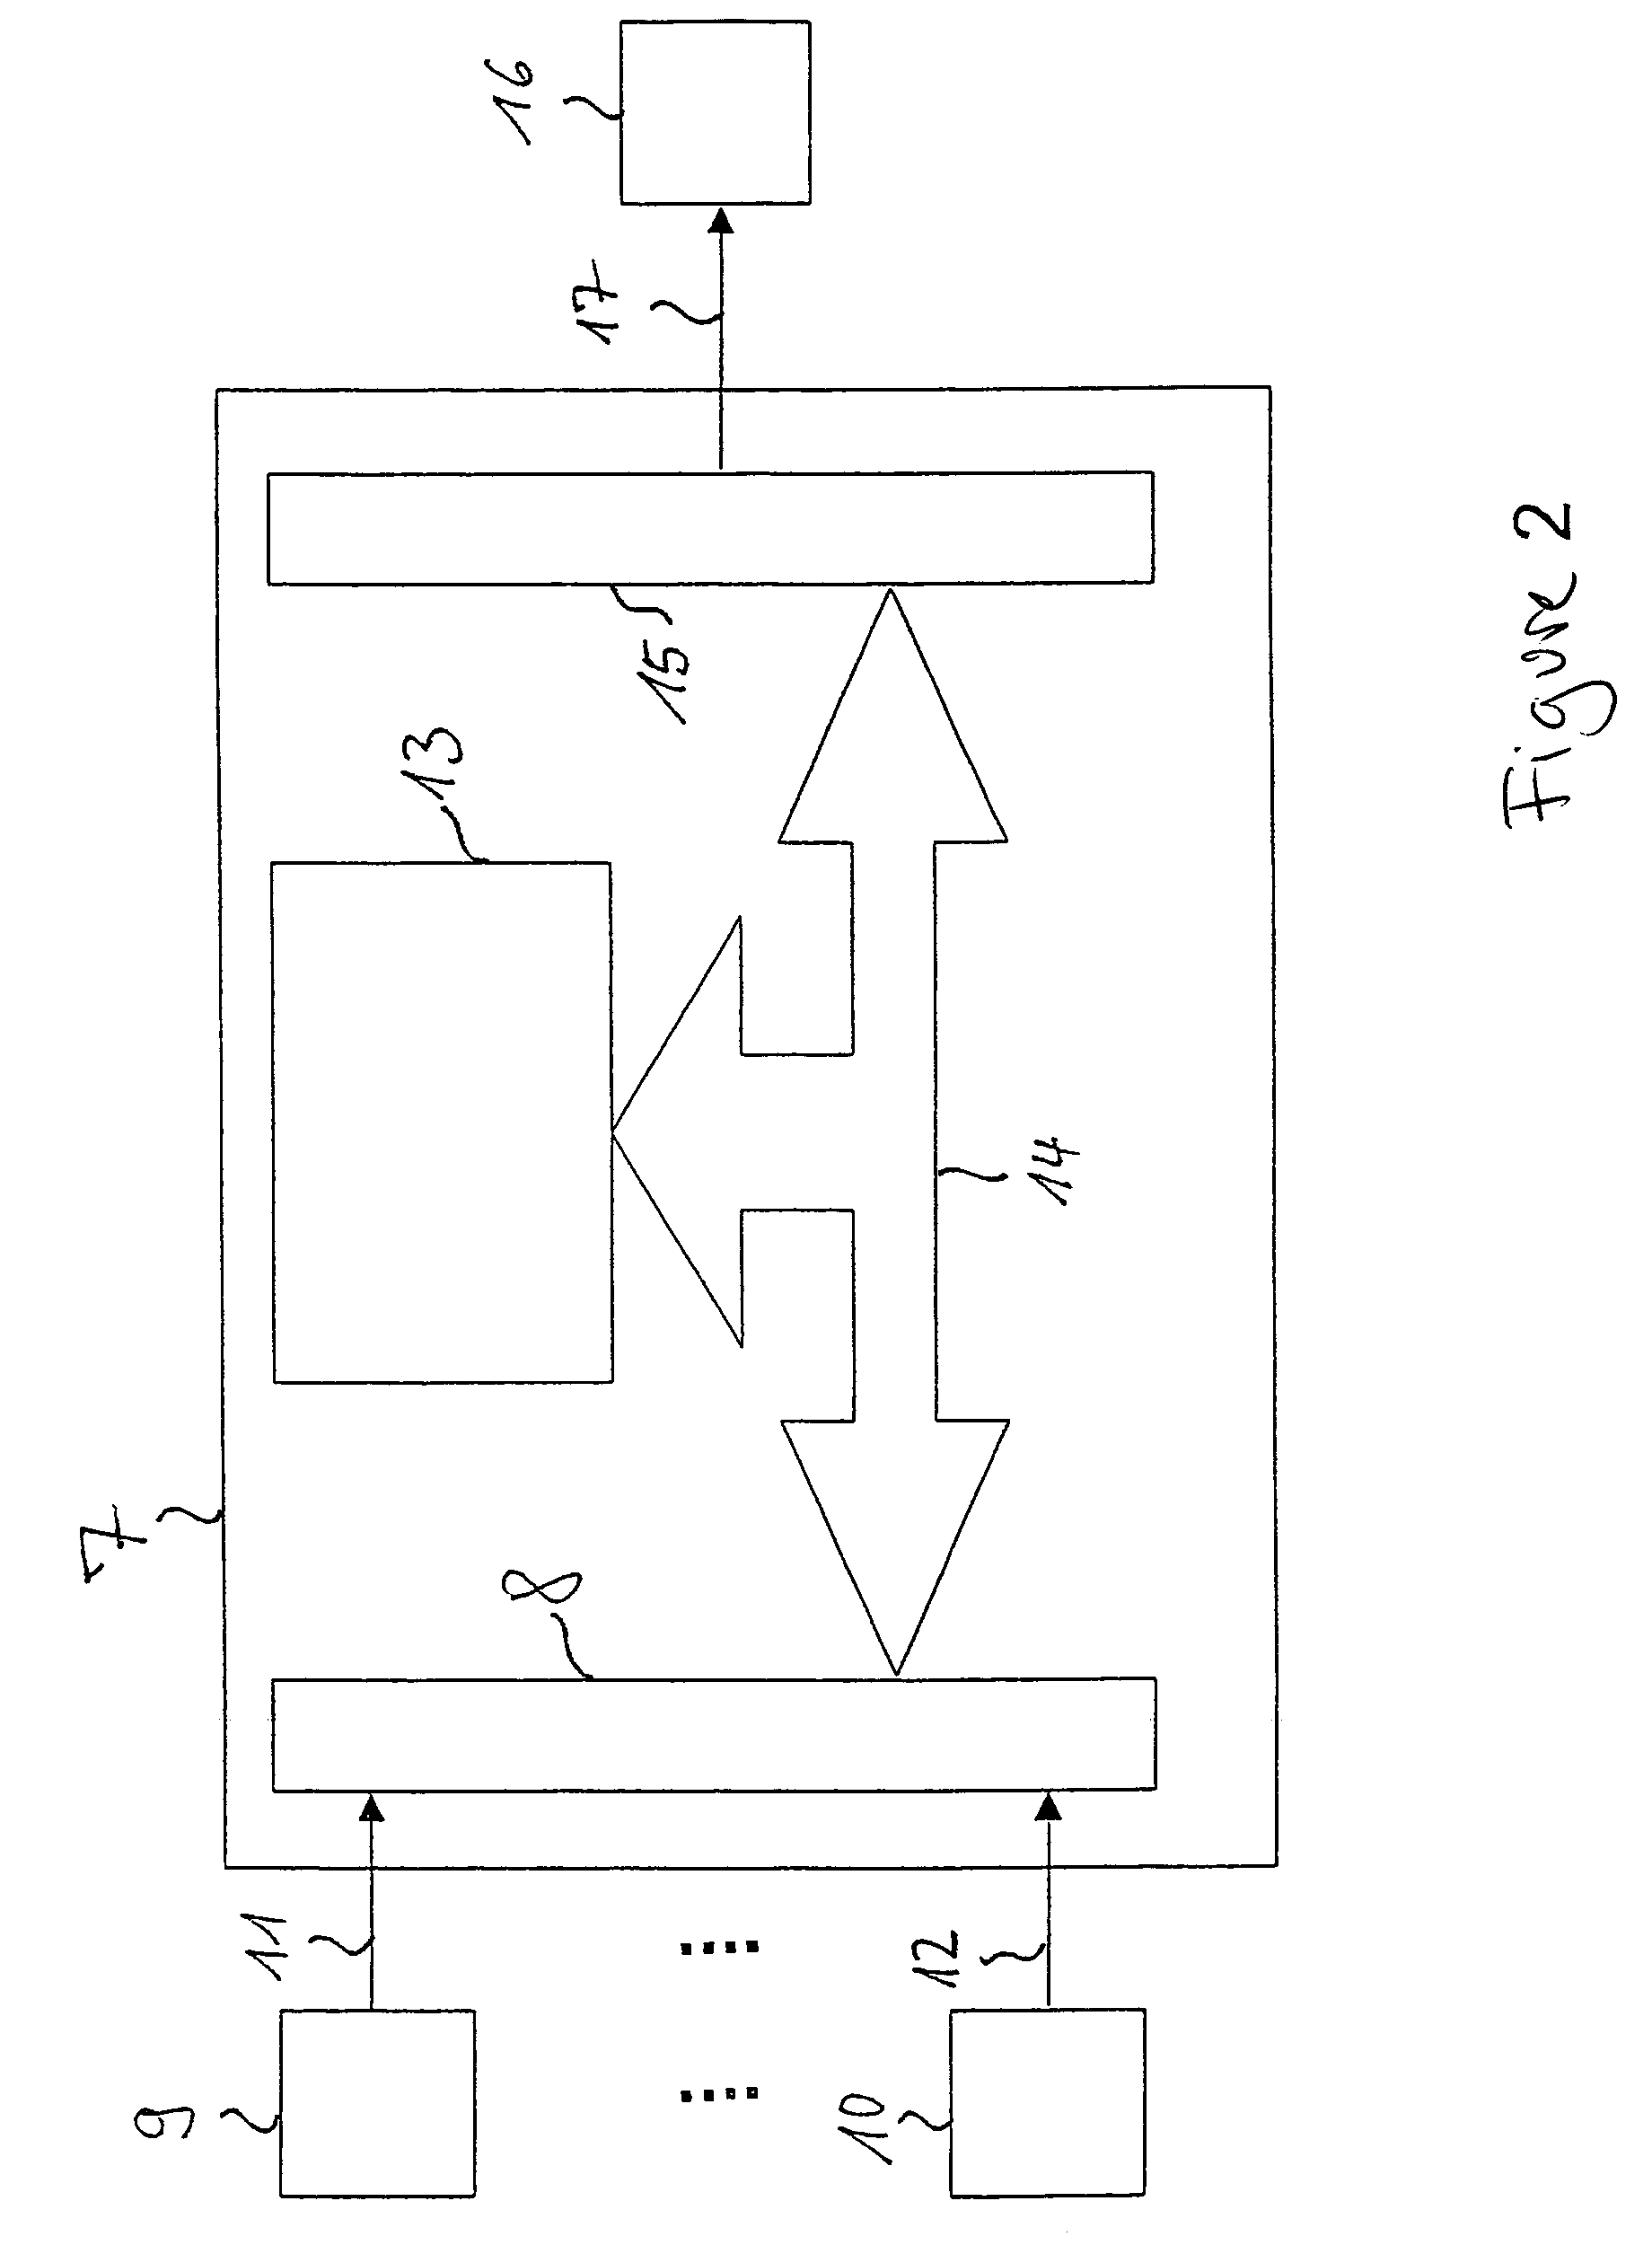 Method and device for automatically triggering a vehicle deceleration